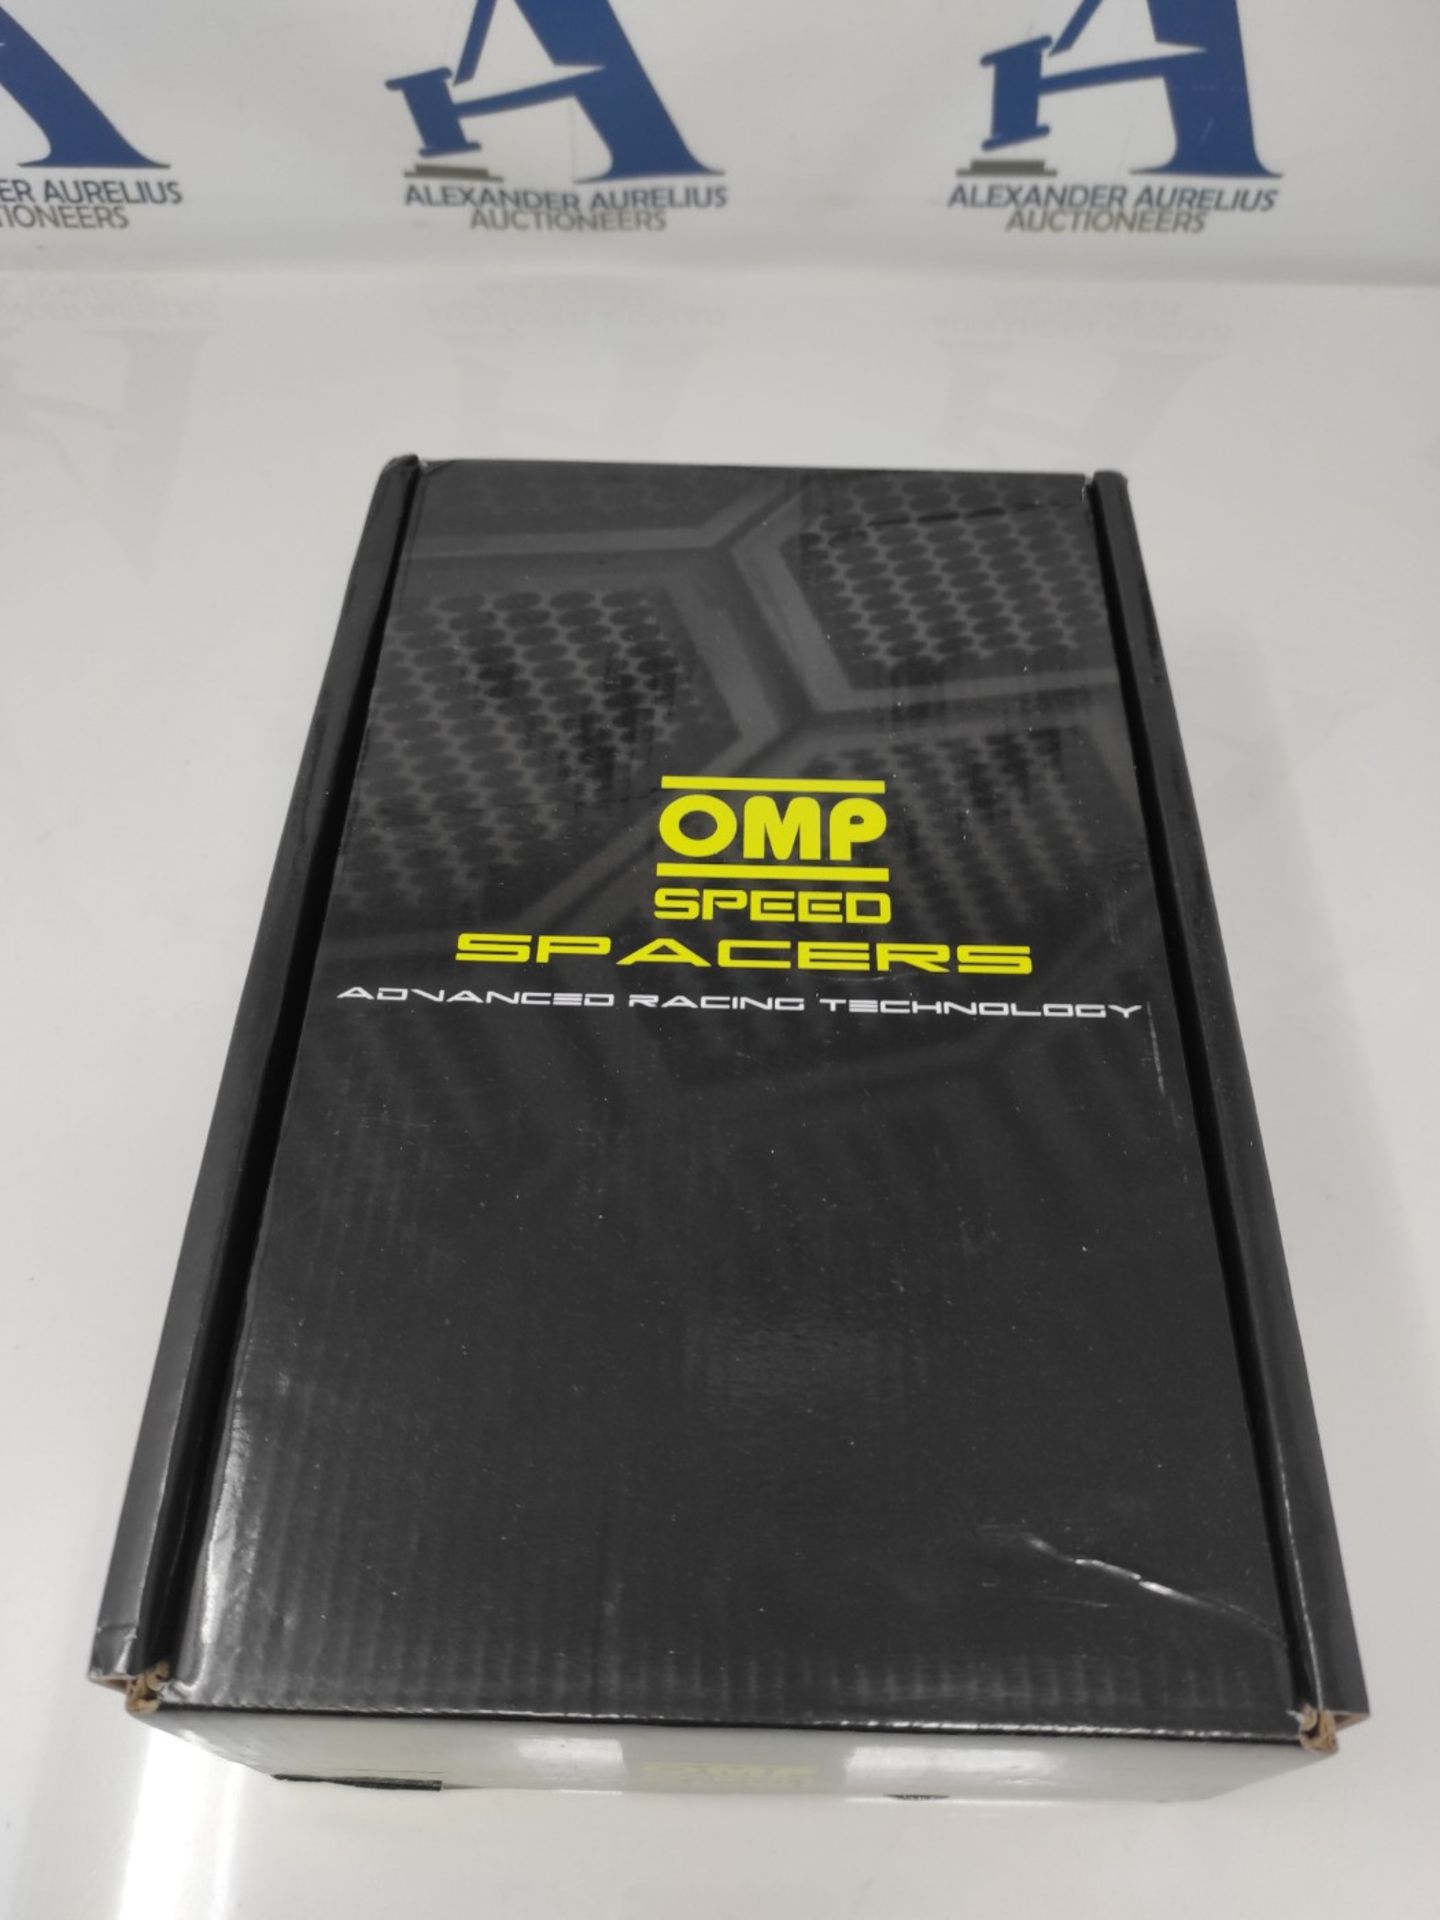 RRP £92.00 OMP SPEED SPACERS OMP 15MM 5X112 57.1 M14X1.5 CONIC+14X1.5 BALL - Image 2 of 3